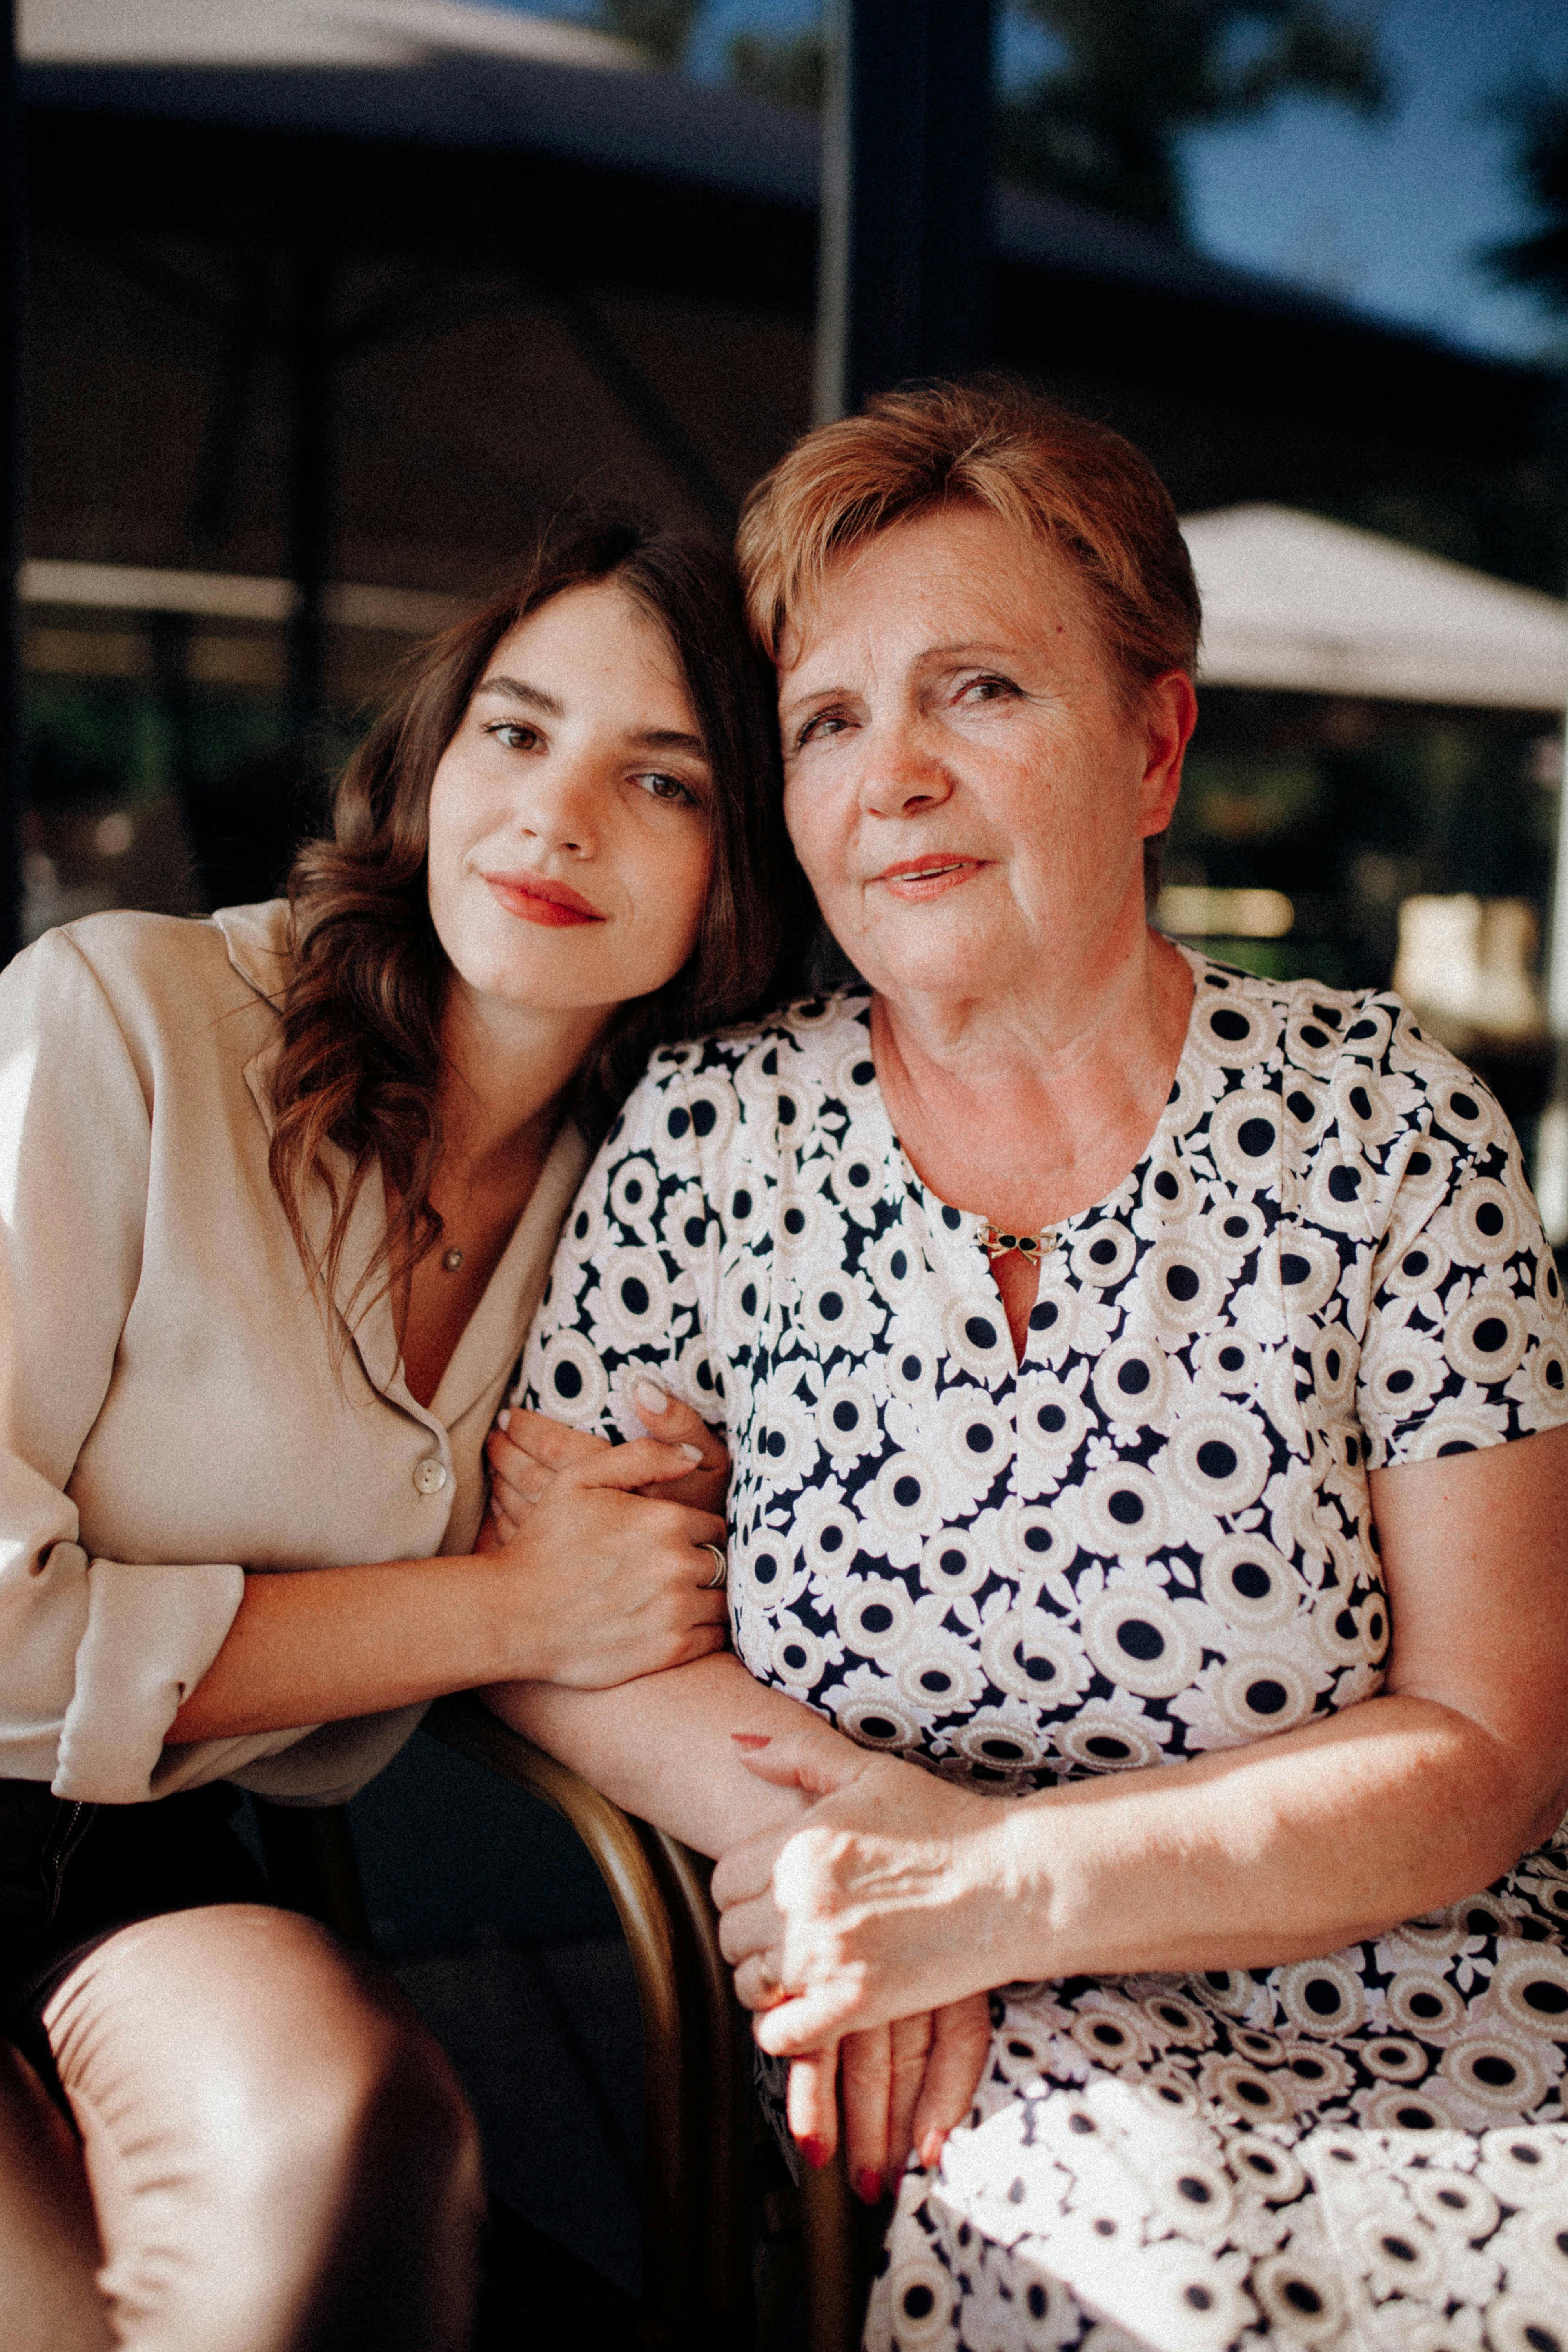 Girl sitting by her mother | Source: Pexels